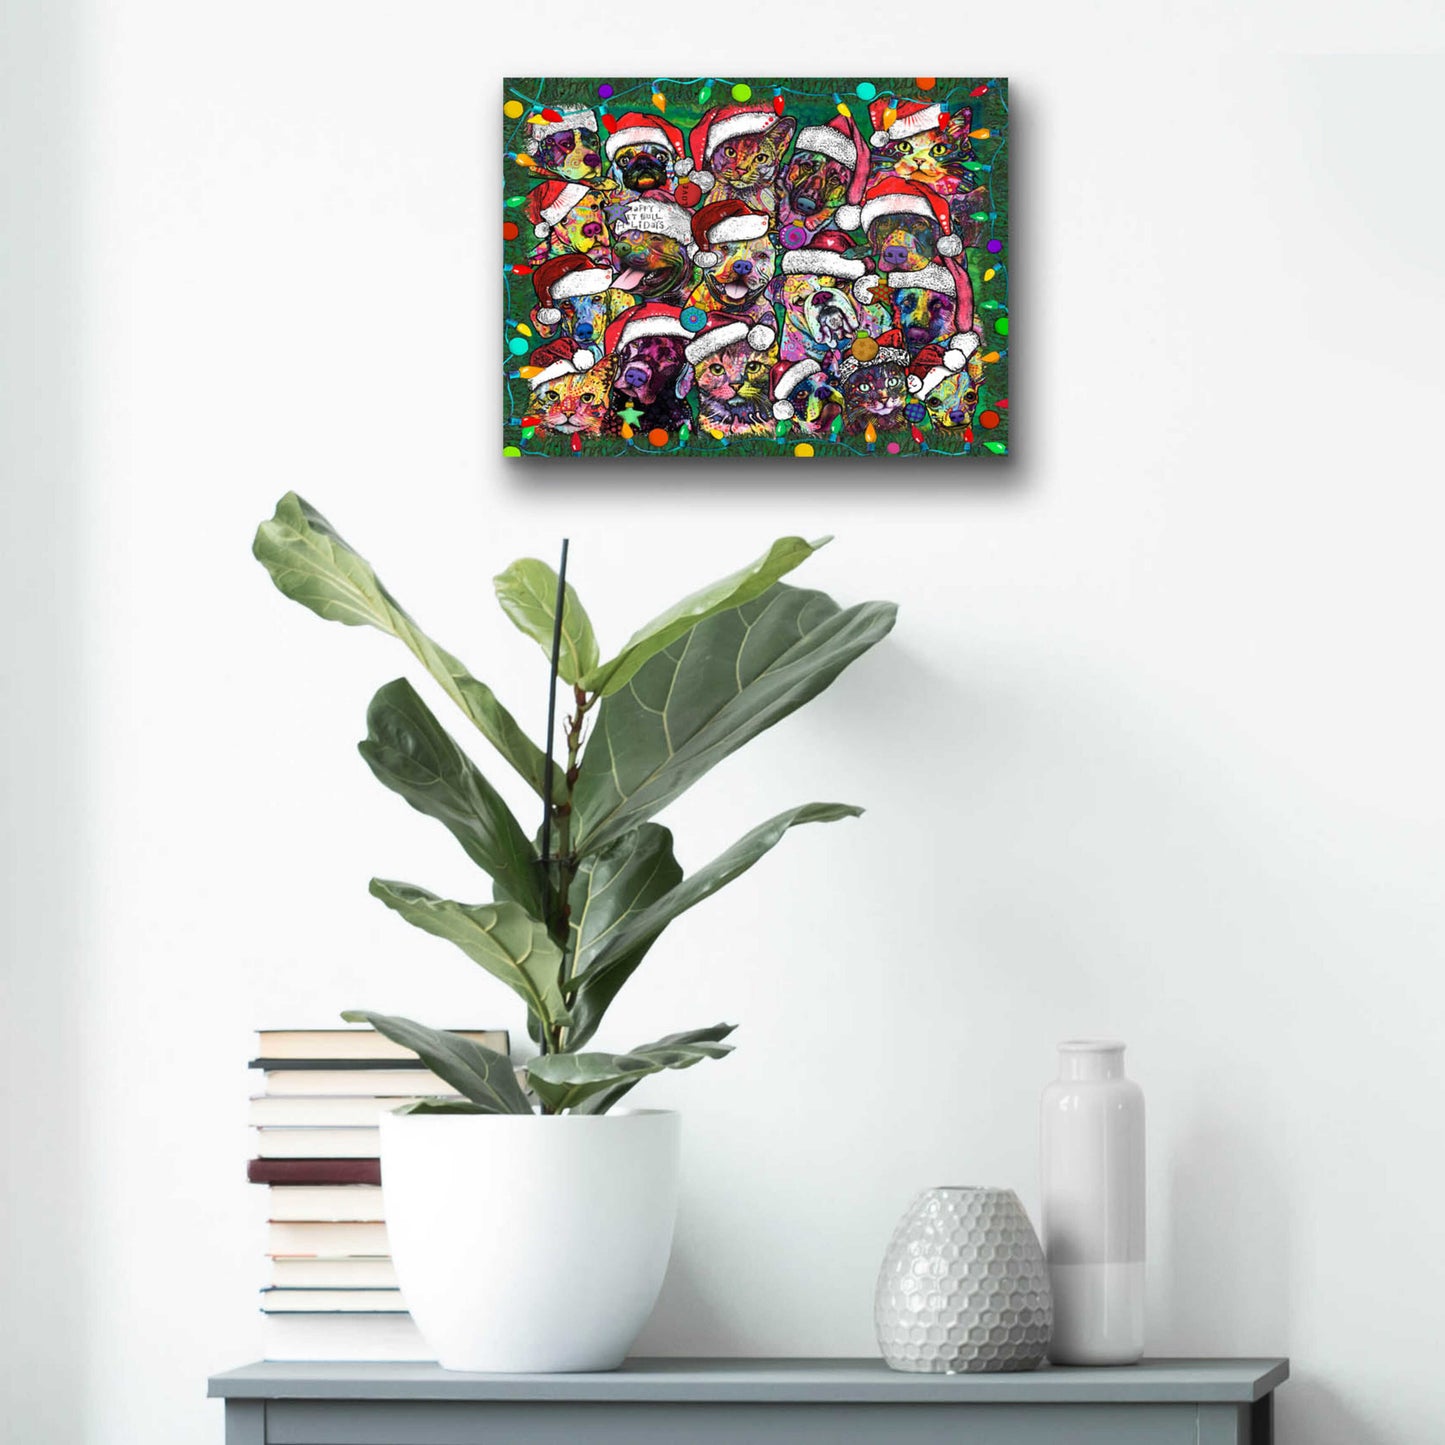 Epic Art 'Christmas Collage' by Dean Russo, Acrylic Glass Wall Art,16x12